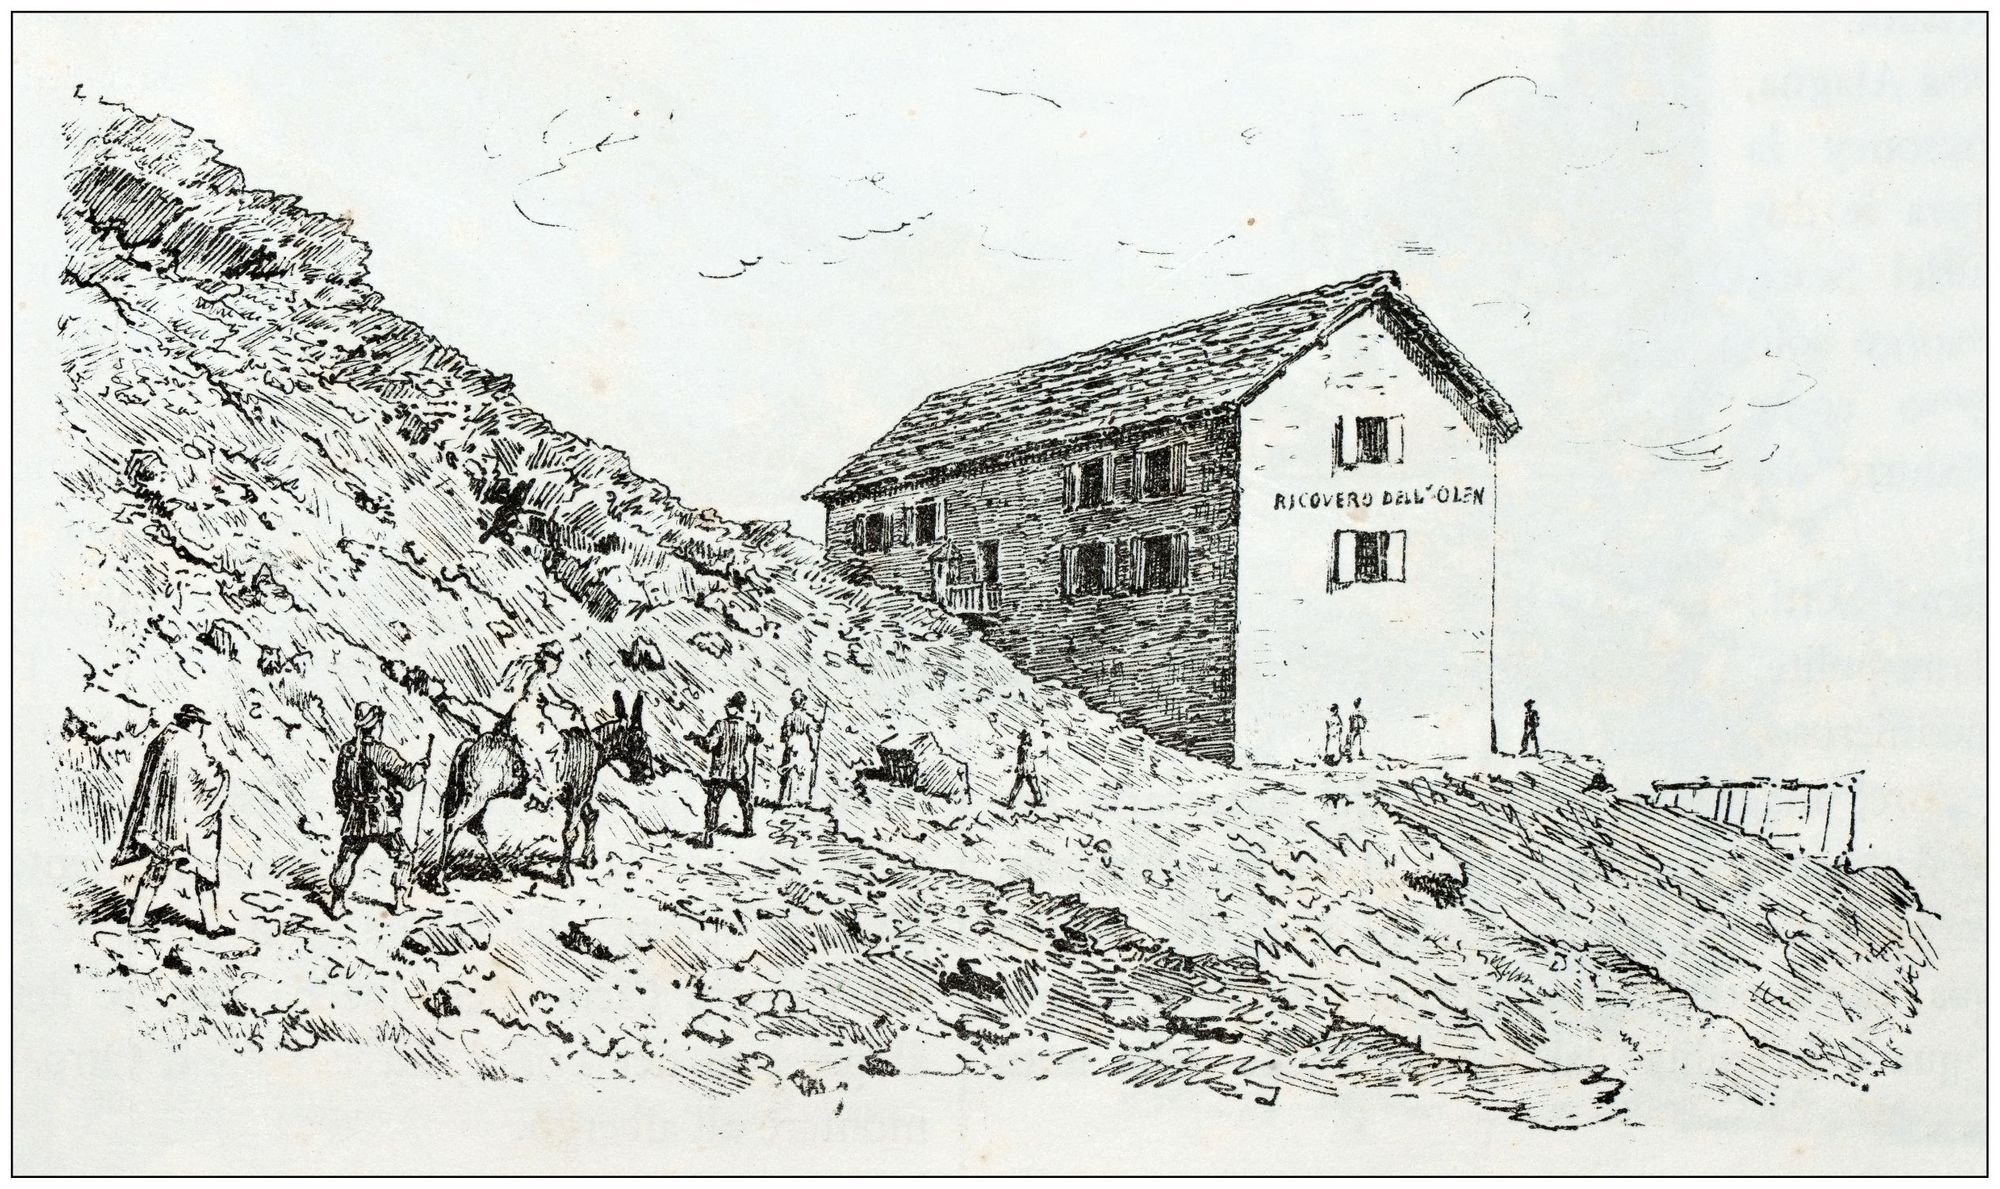 An illustration of a group of hikers, including a woman riding side saddle, arriving at a mountain hut in the Italian Alps, Valsesia, Piedmont. Illustration: Getty